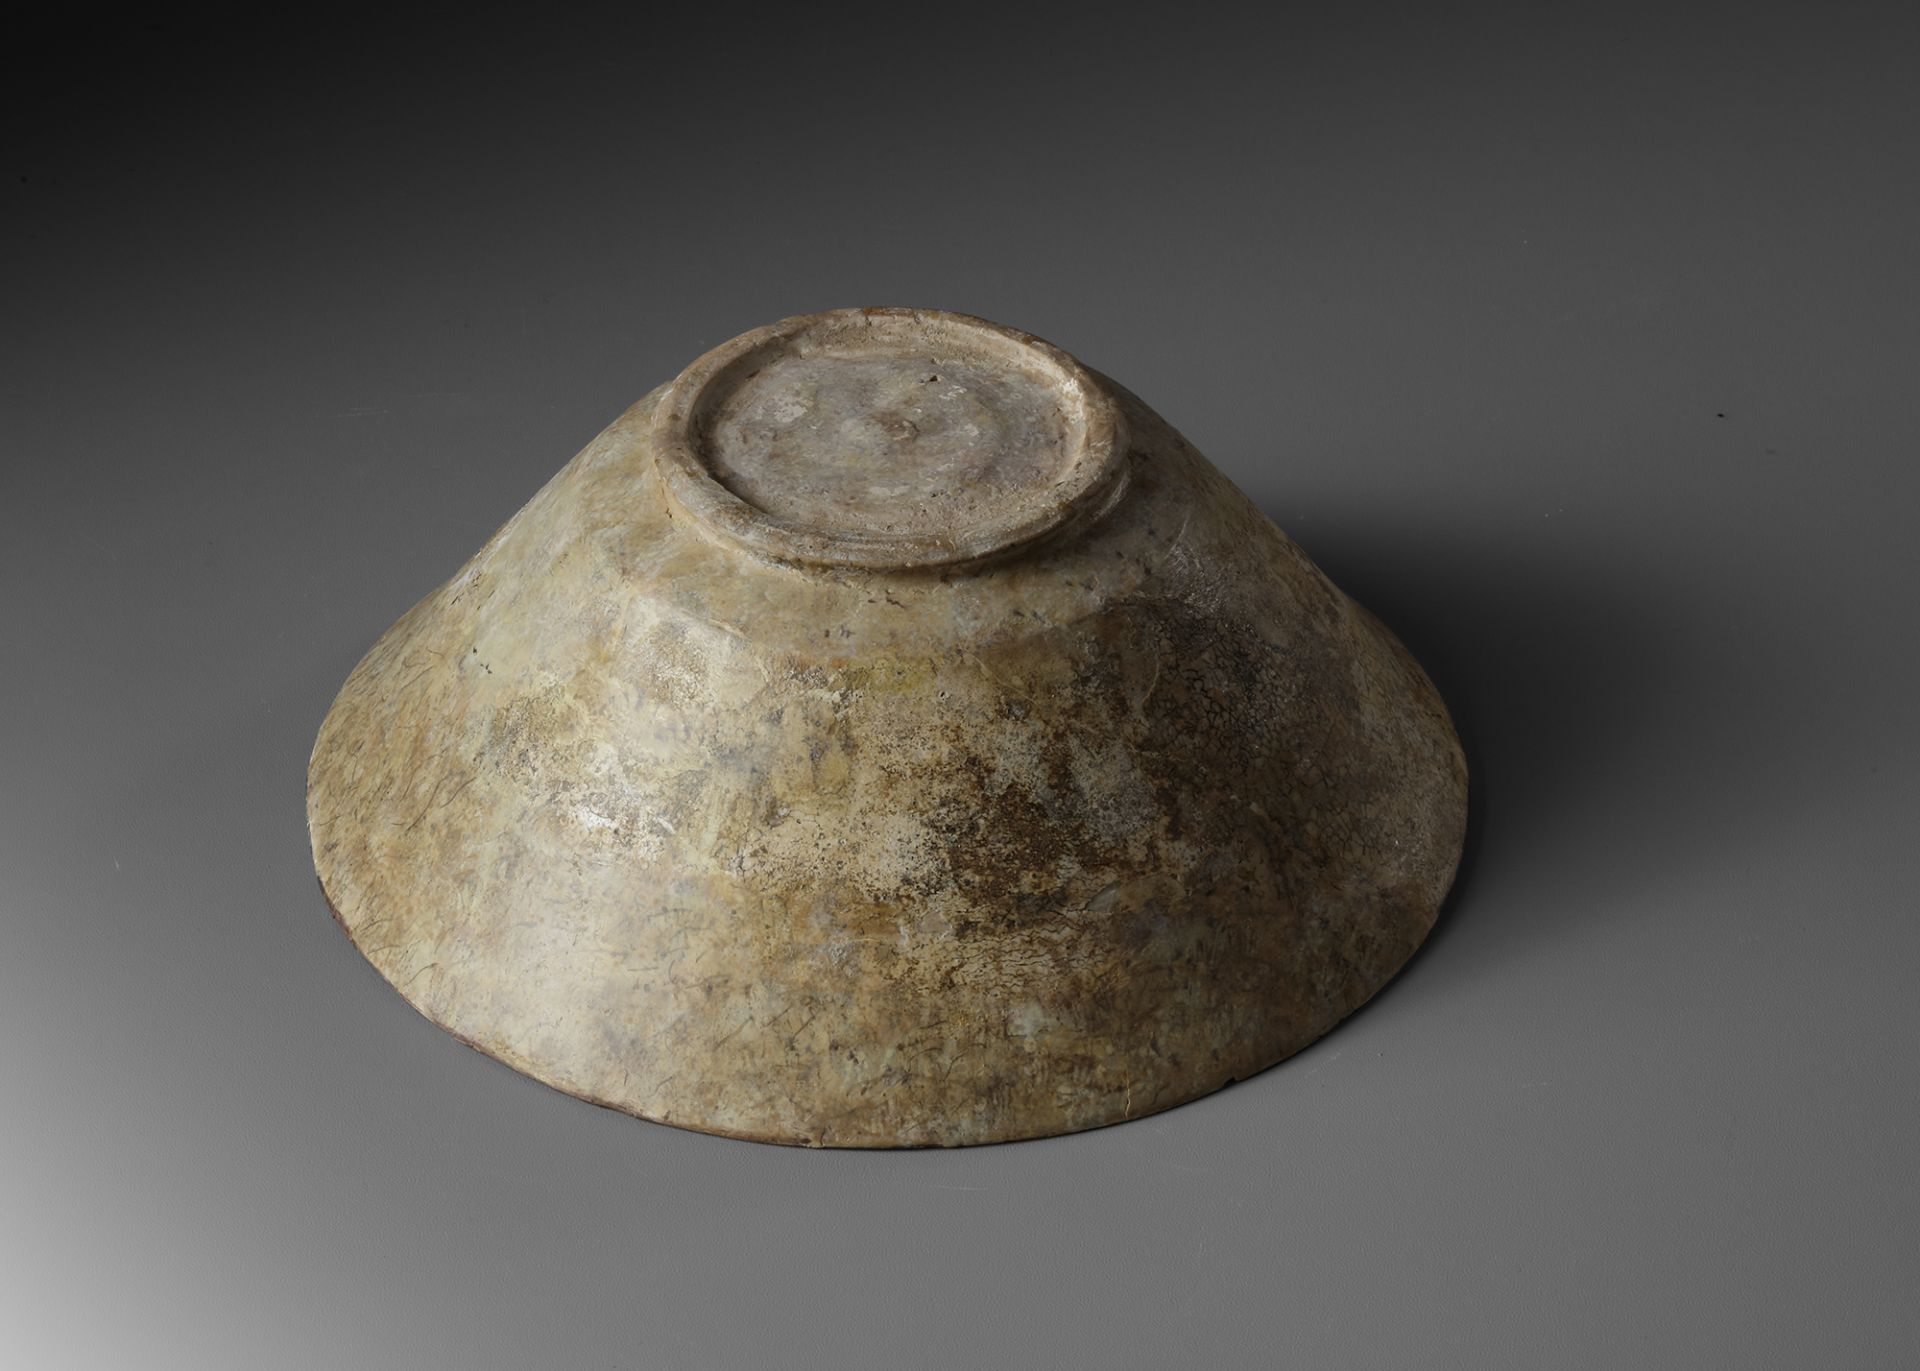 A NISHAPUR CONICAL POTTERY BOWL, PERSIA, LATE 9TH-EARLY 10TH CENTURY - Image 4 of 4